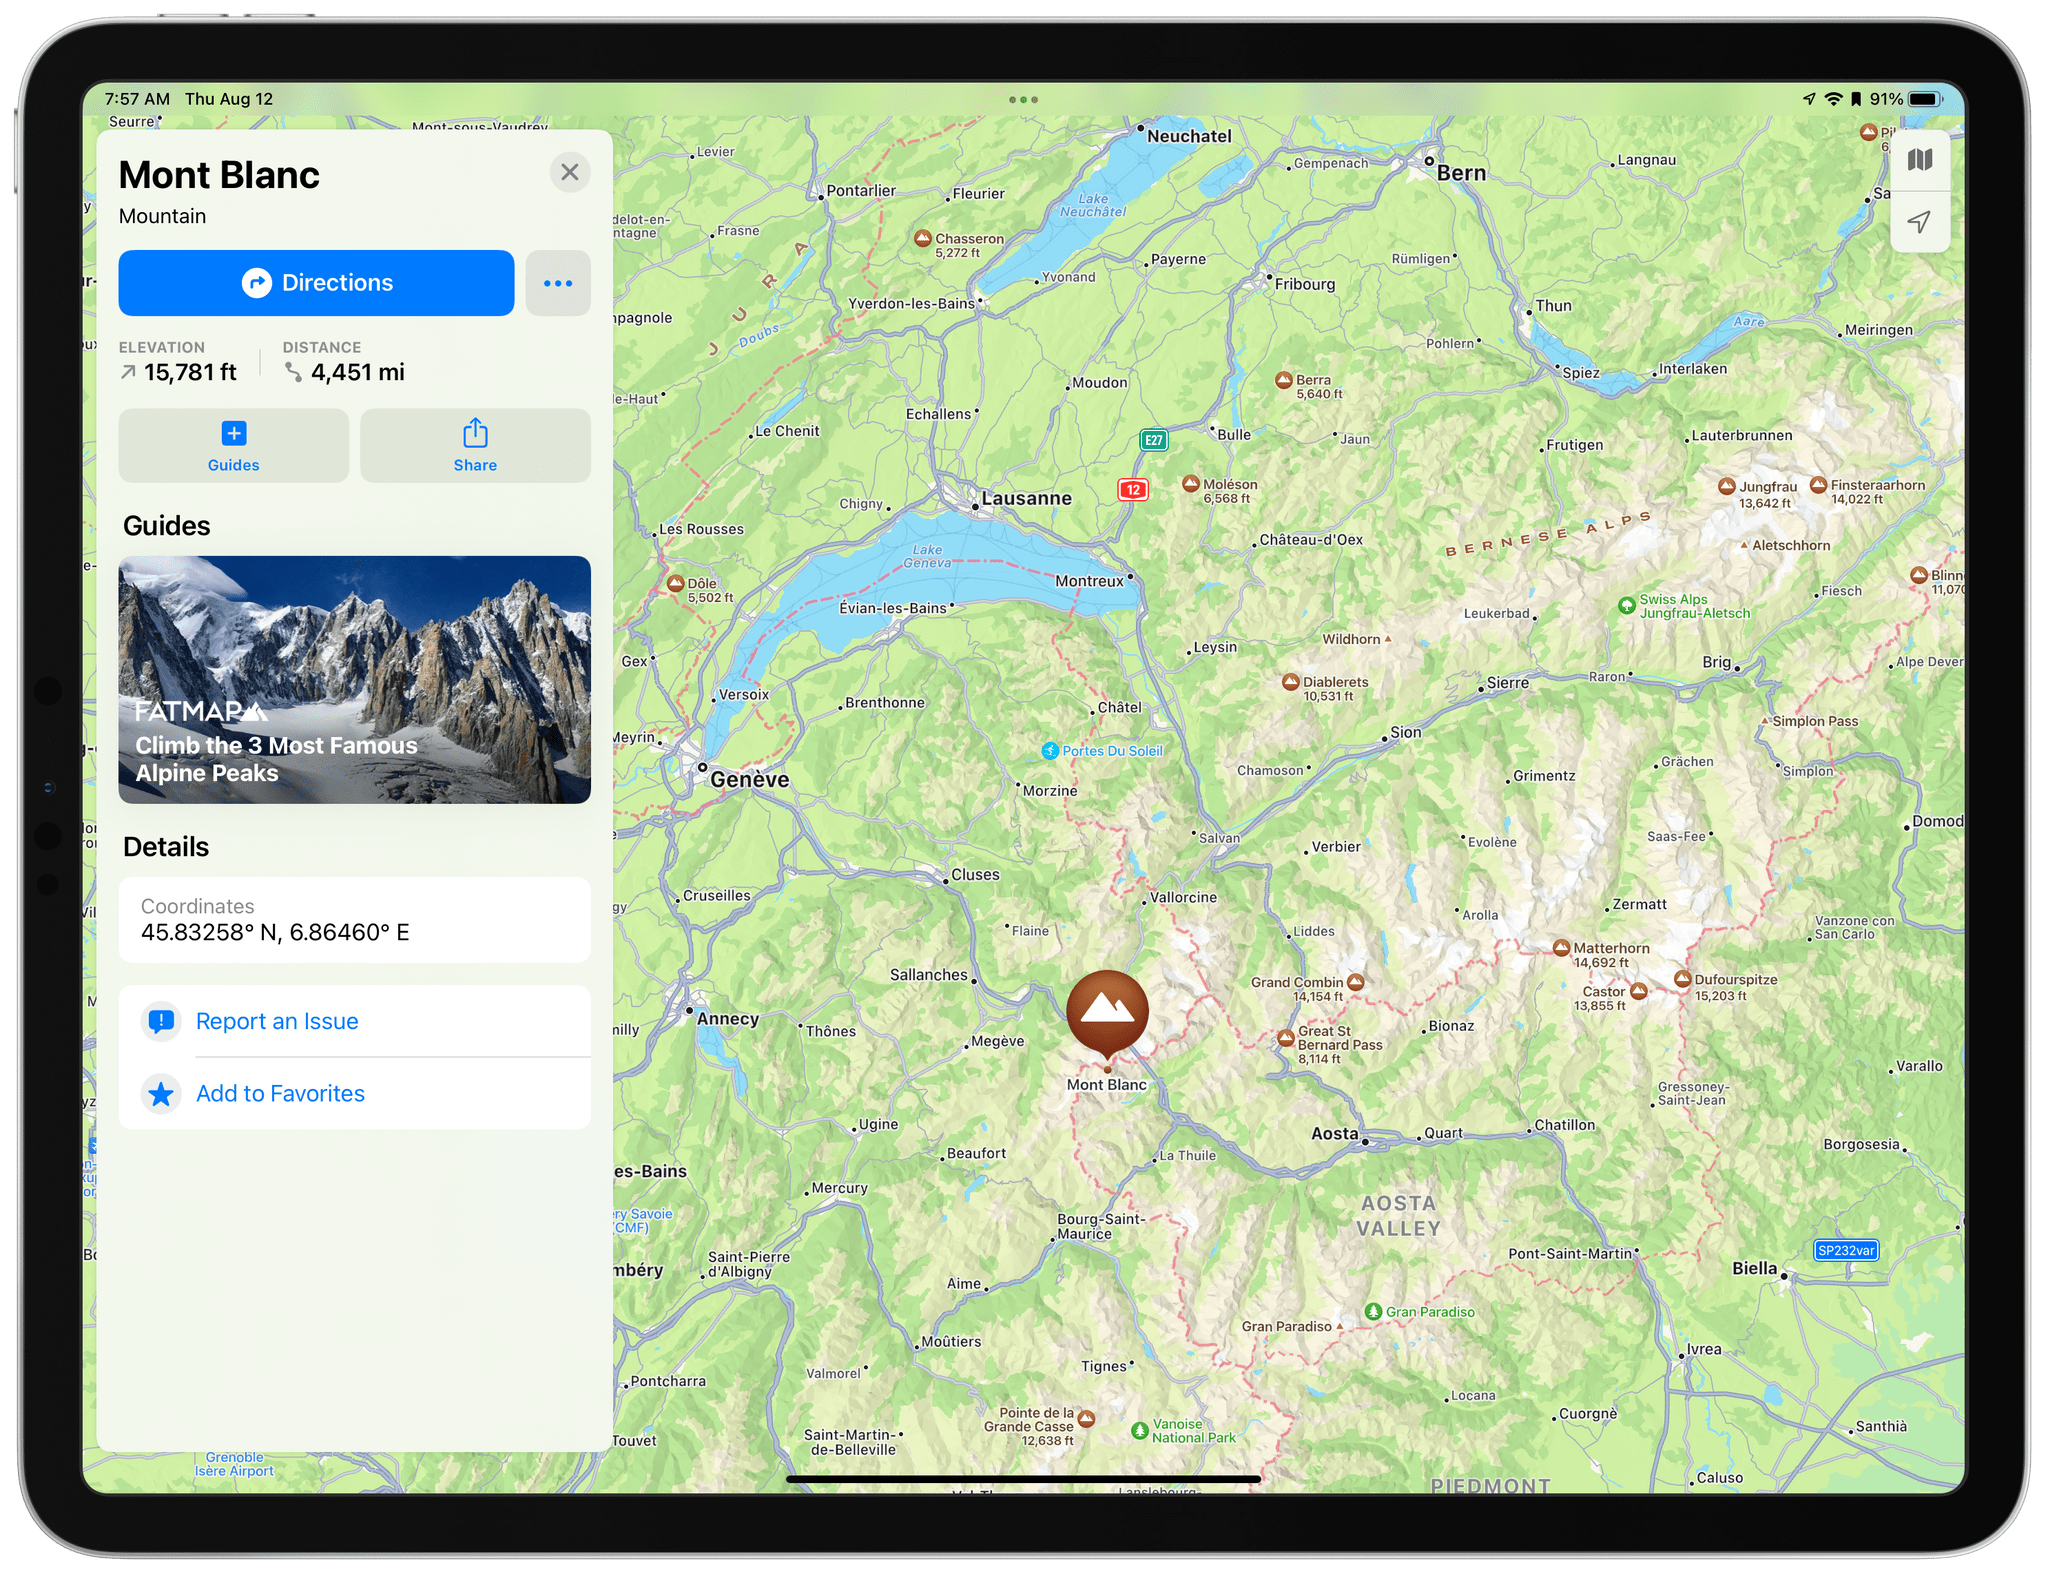 In contrast, iPadOS 15 and the other updated versions of Maps make it easy to find mountains and other geographic features and learn more about them.